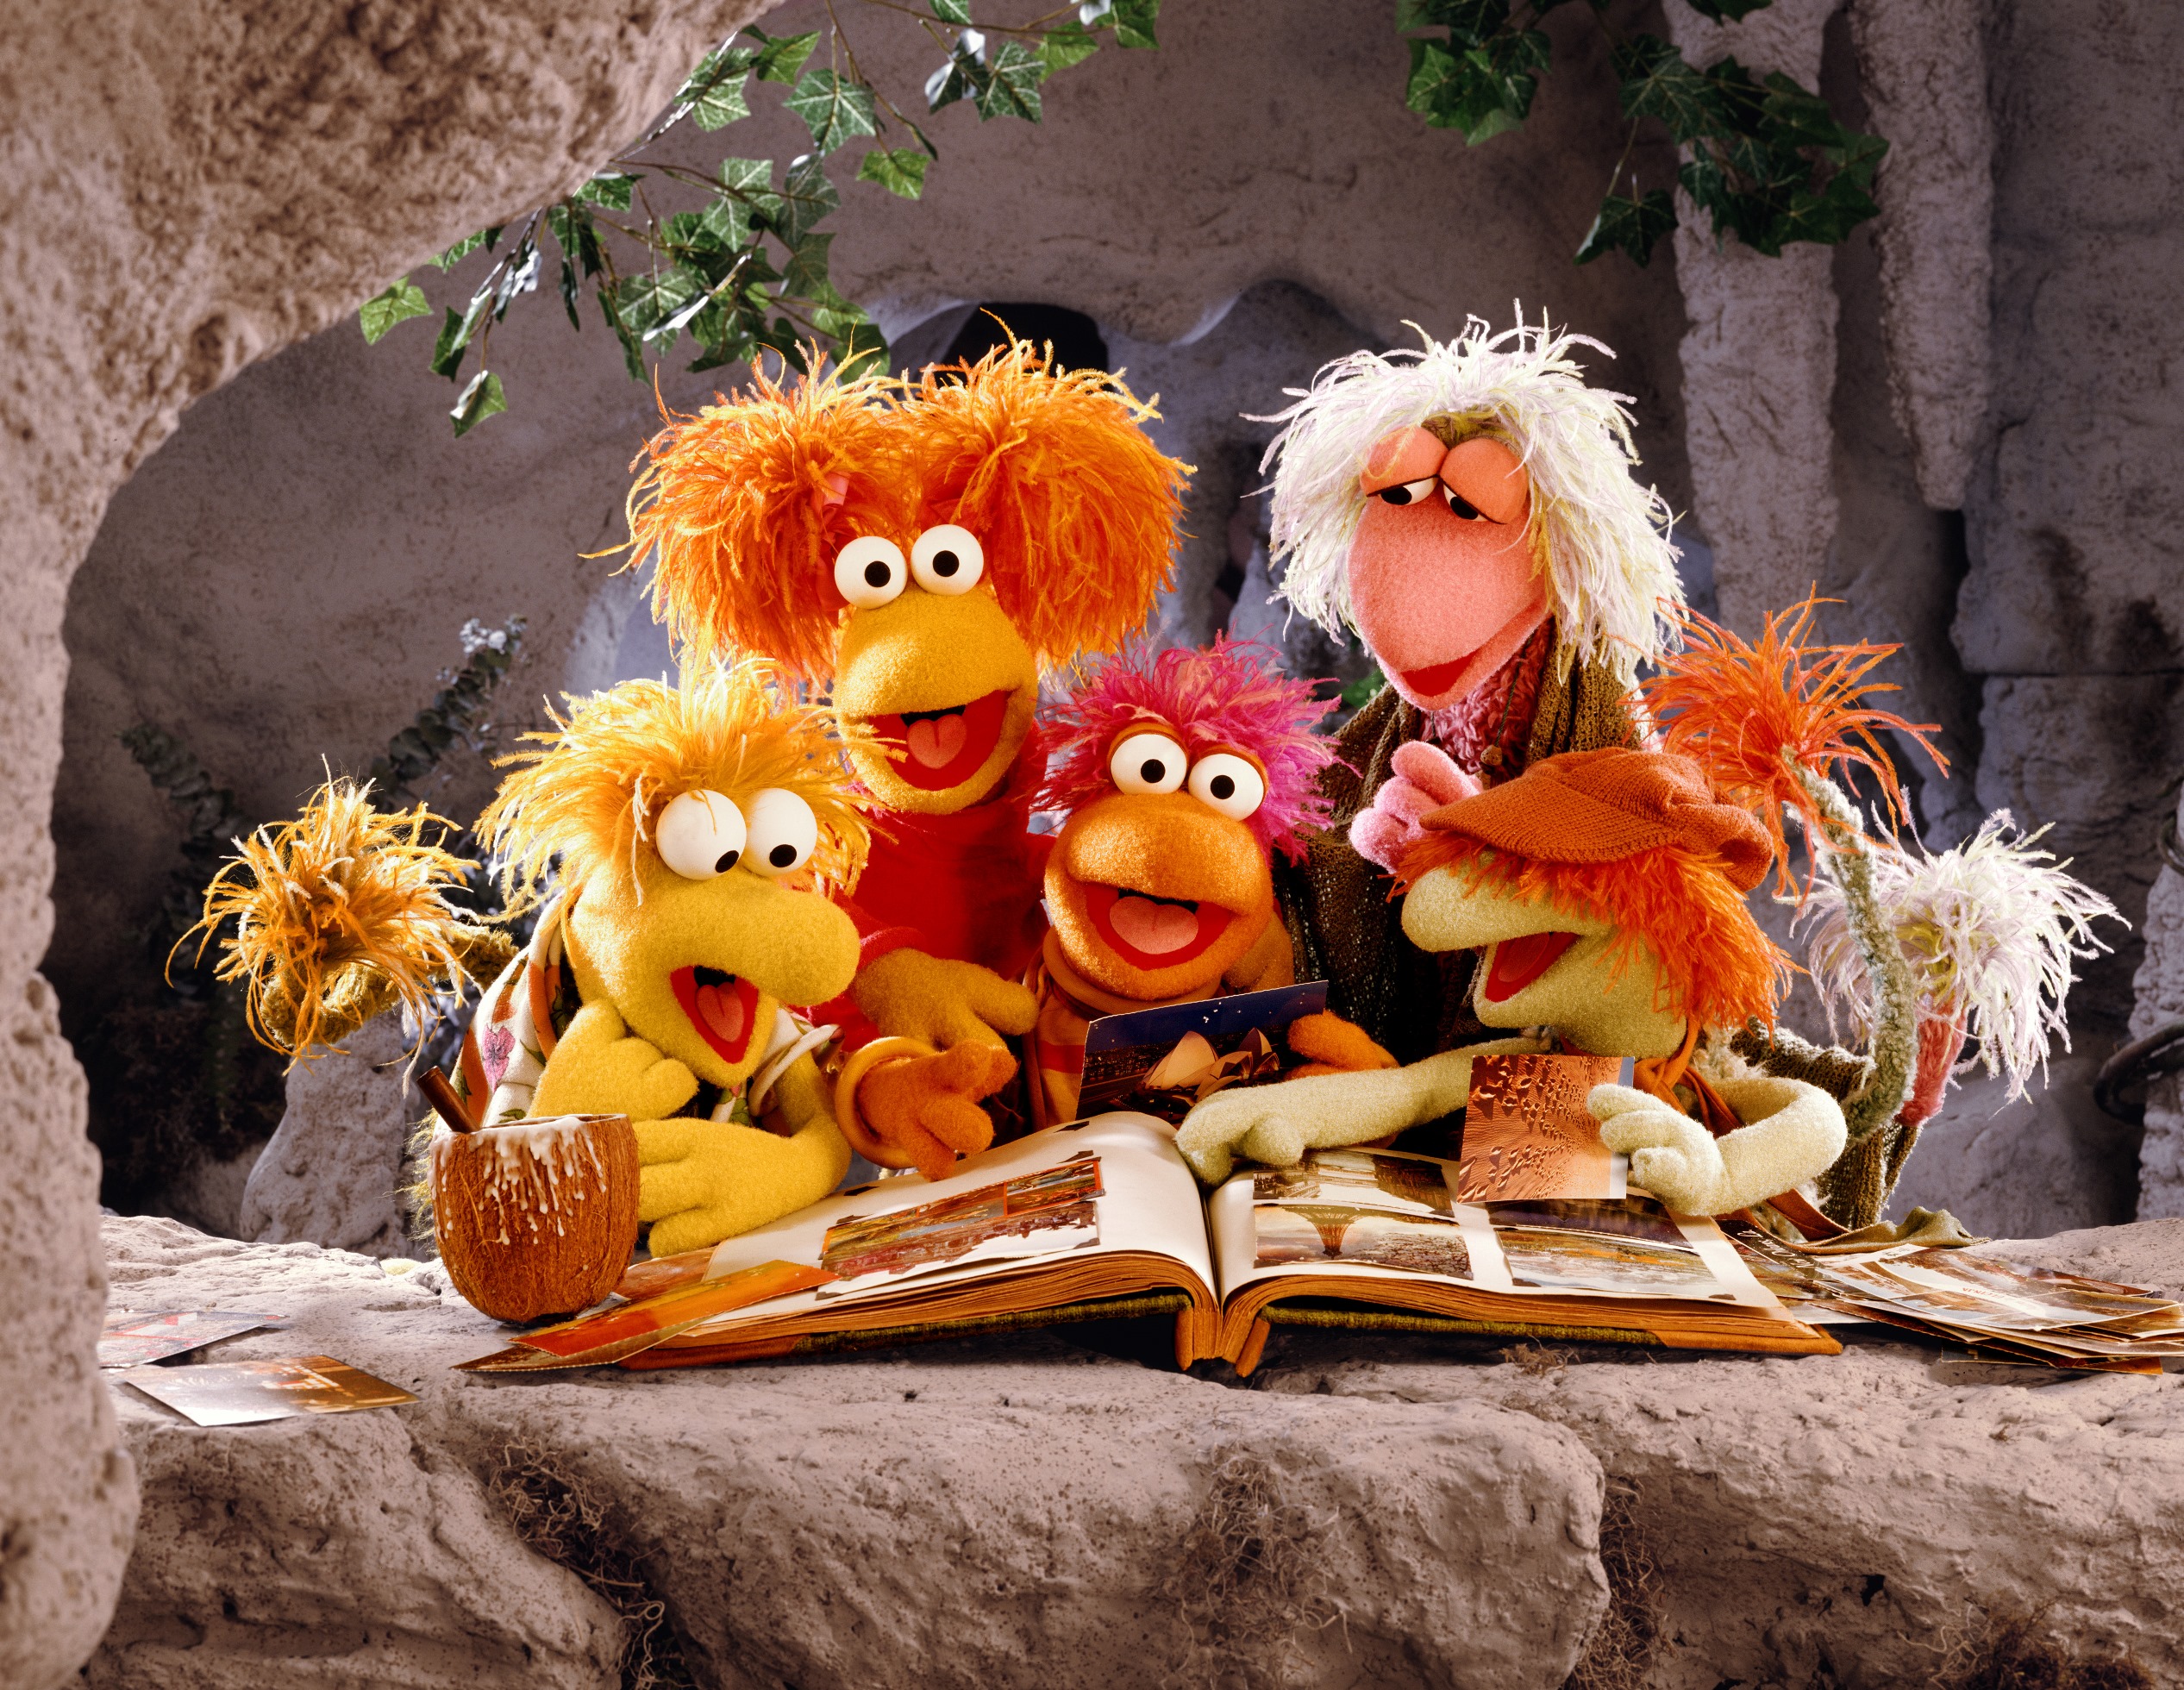 Jim Hensen’s Fraggle Rock – Yes I am showing my age!